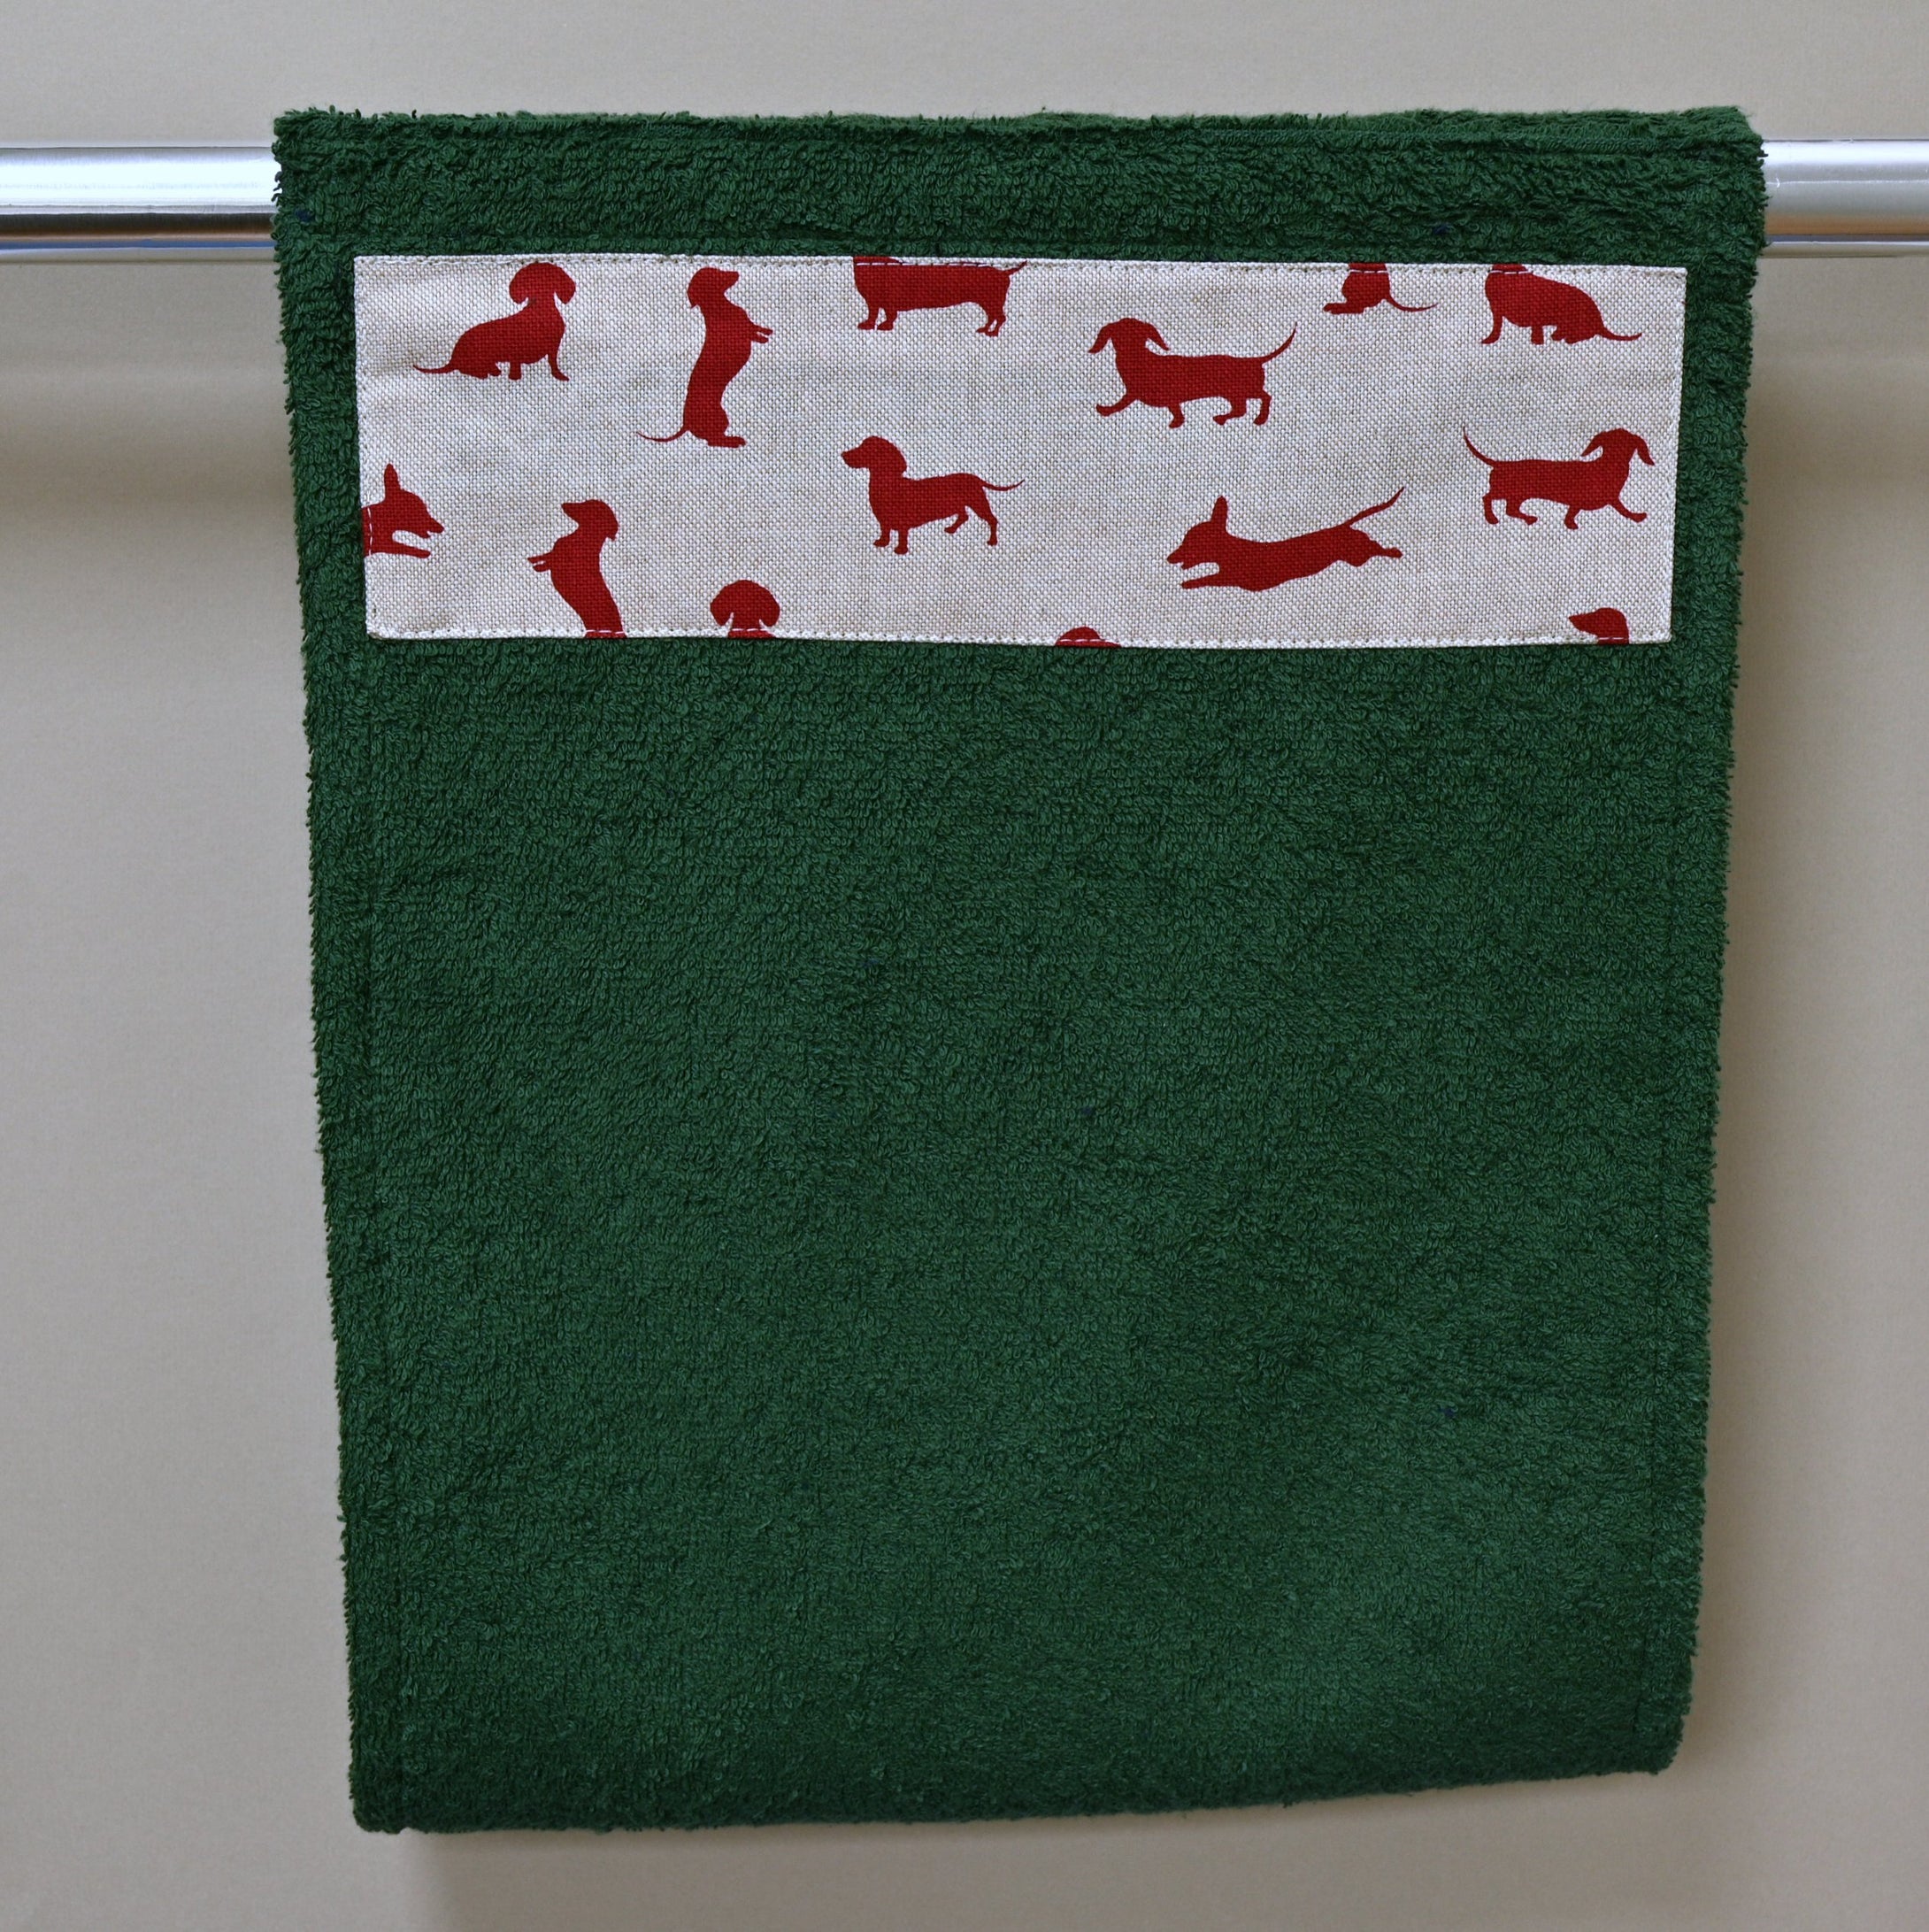 Hand Roller Towels, Red Dachshund, Green, Navy Blue or Black Towel